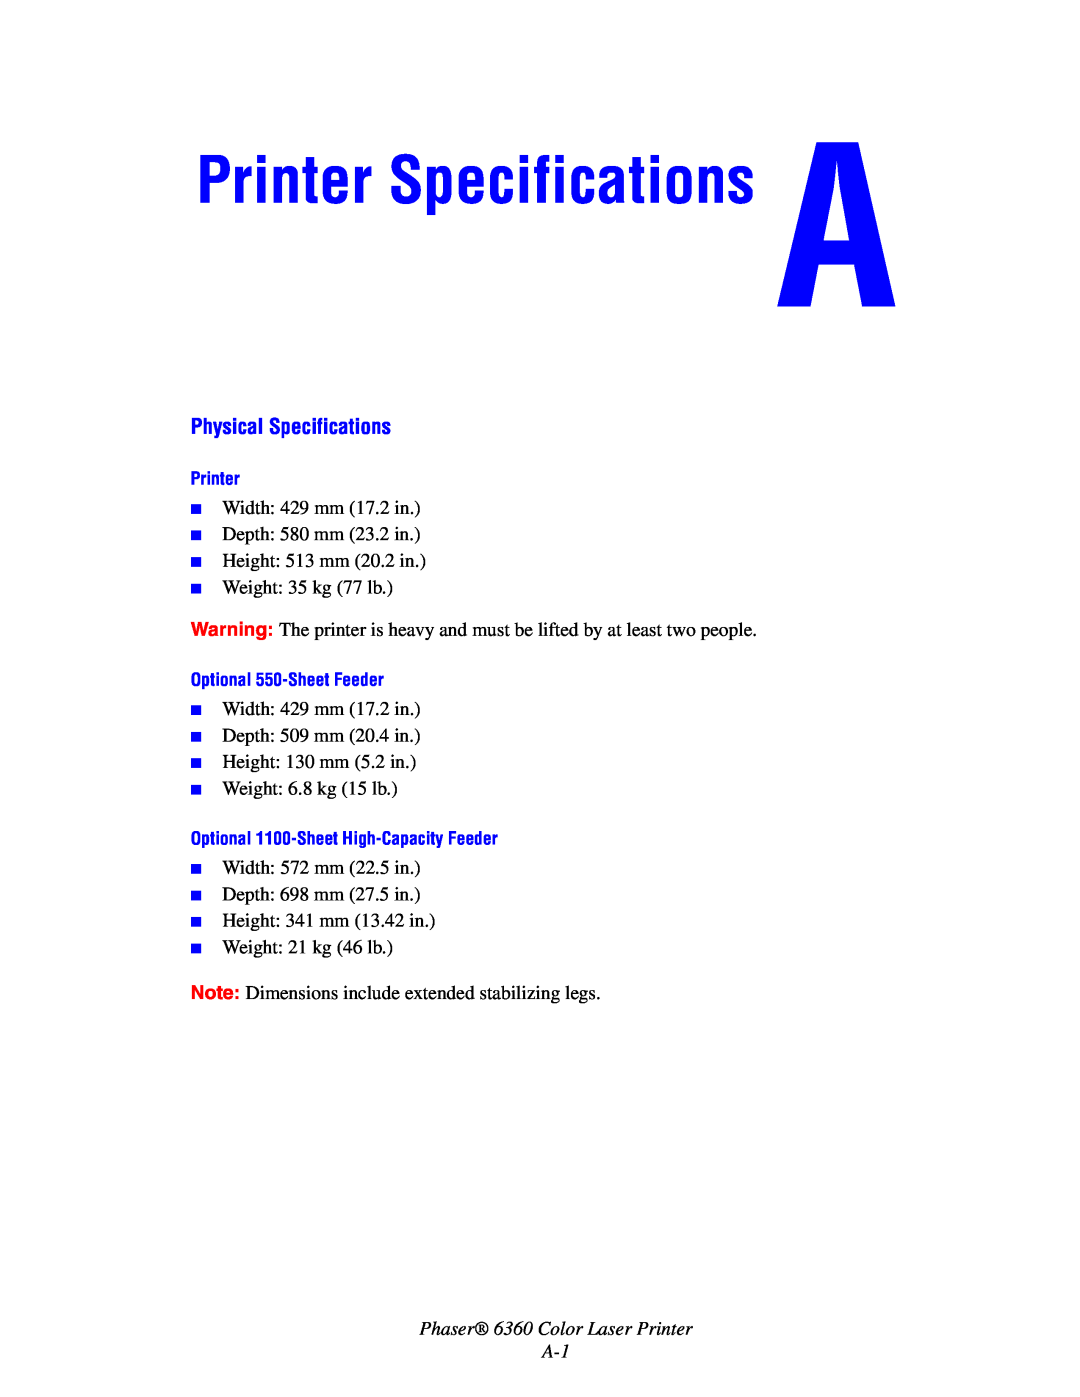 Xerox manual Printer Specifications, Physical Specifications, Phaser 6360 Color Laser Printer A-1 